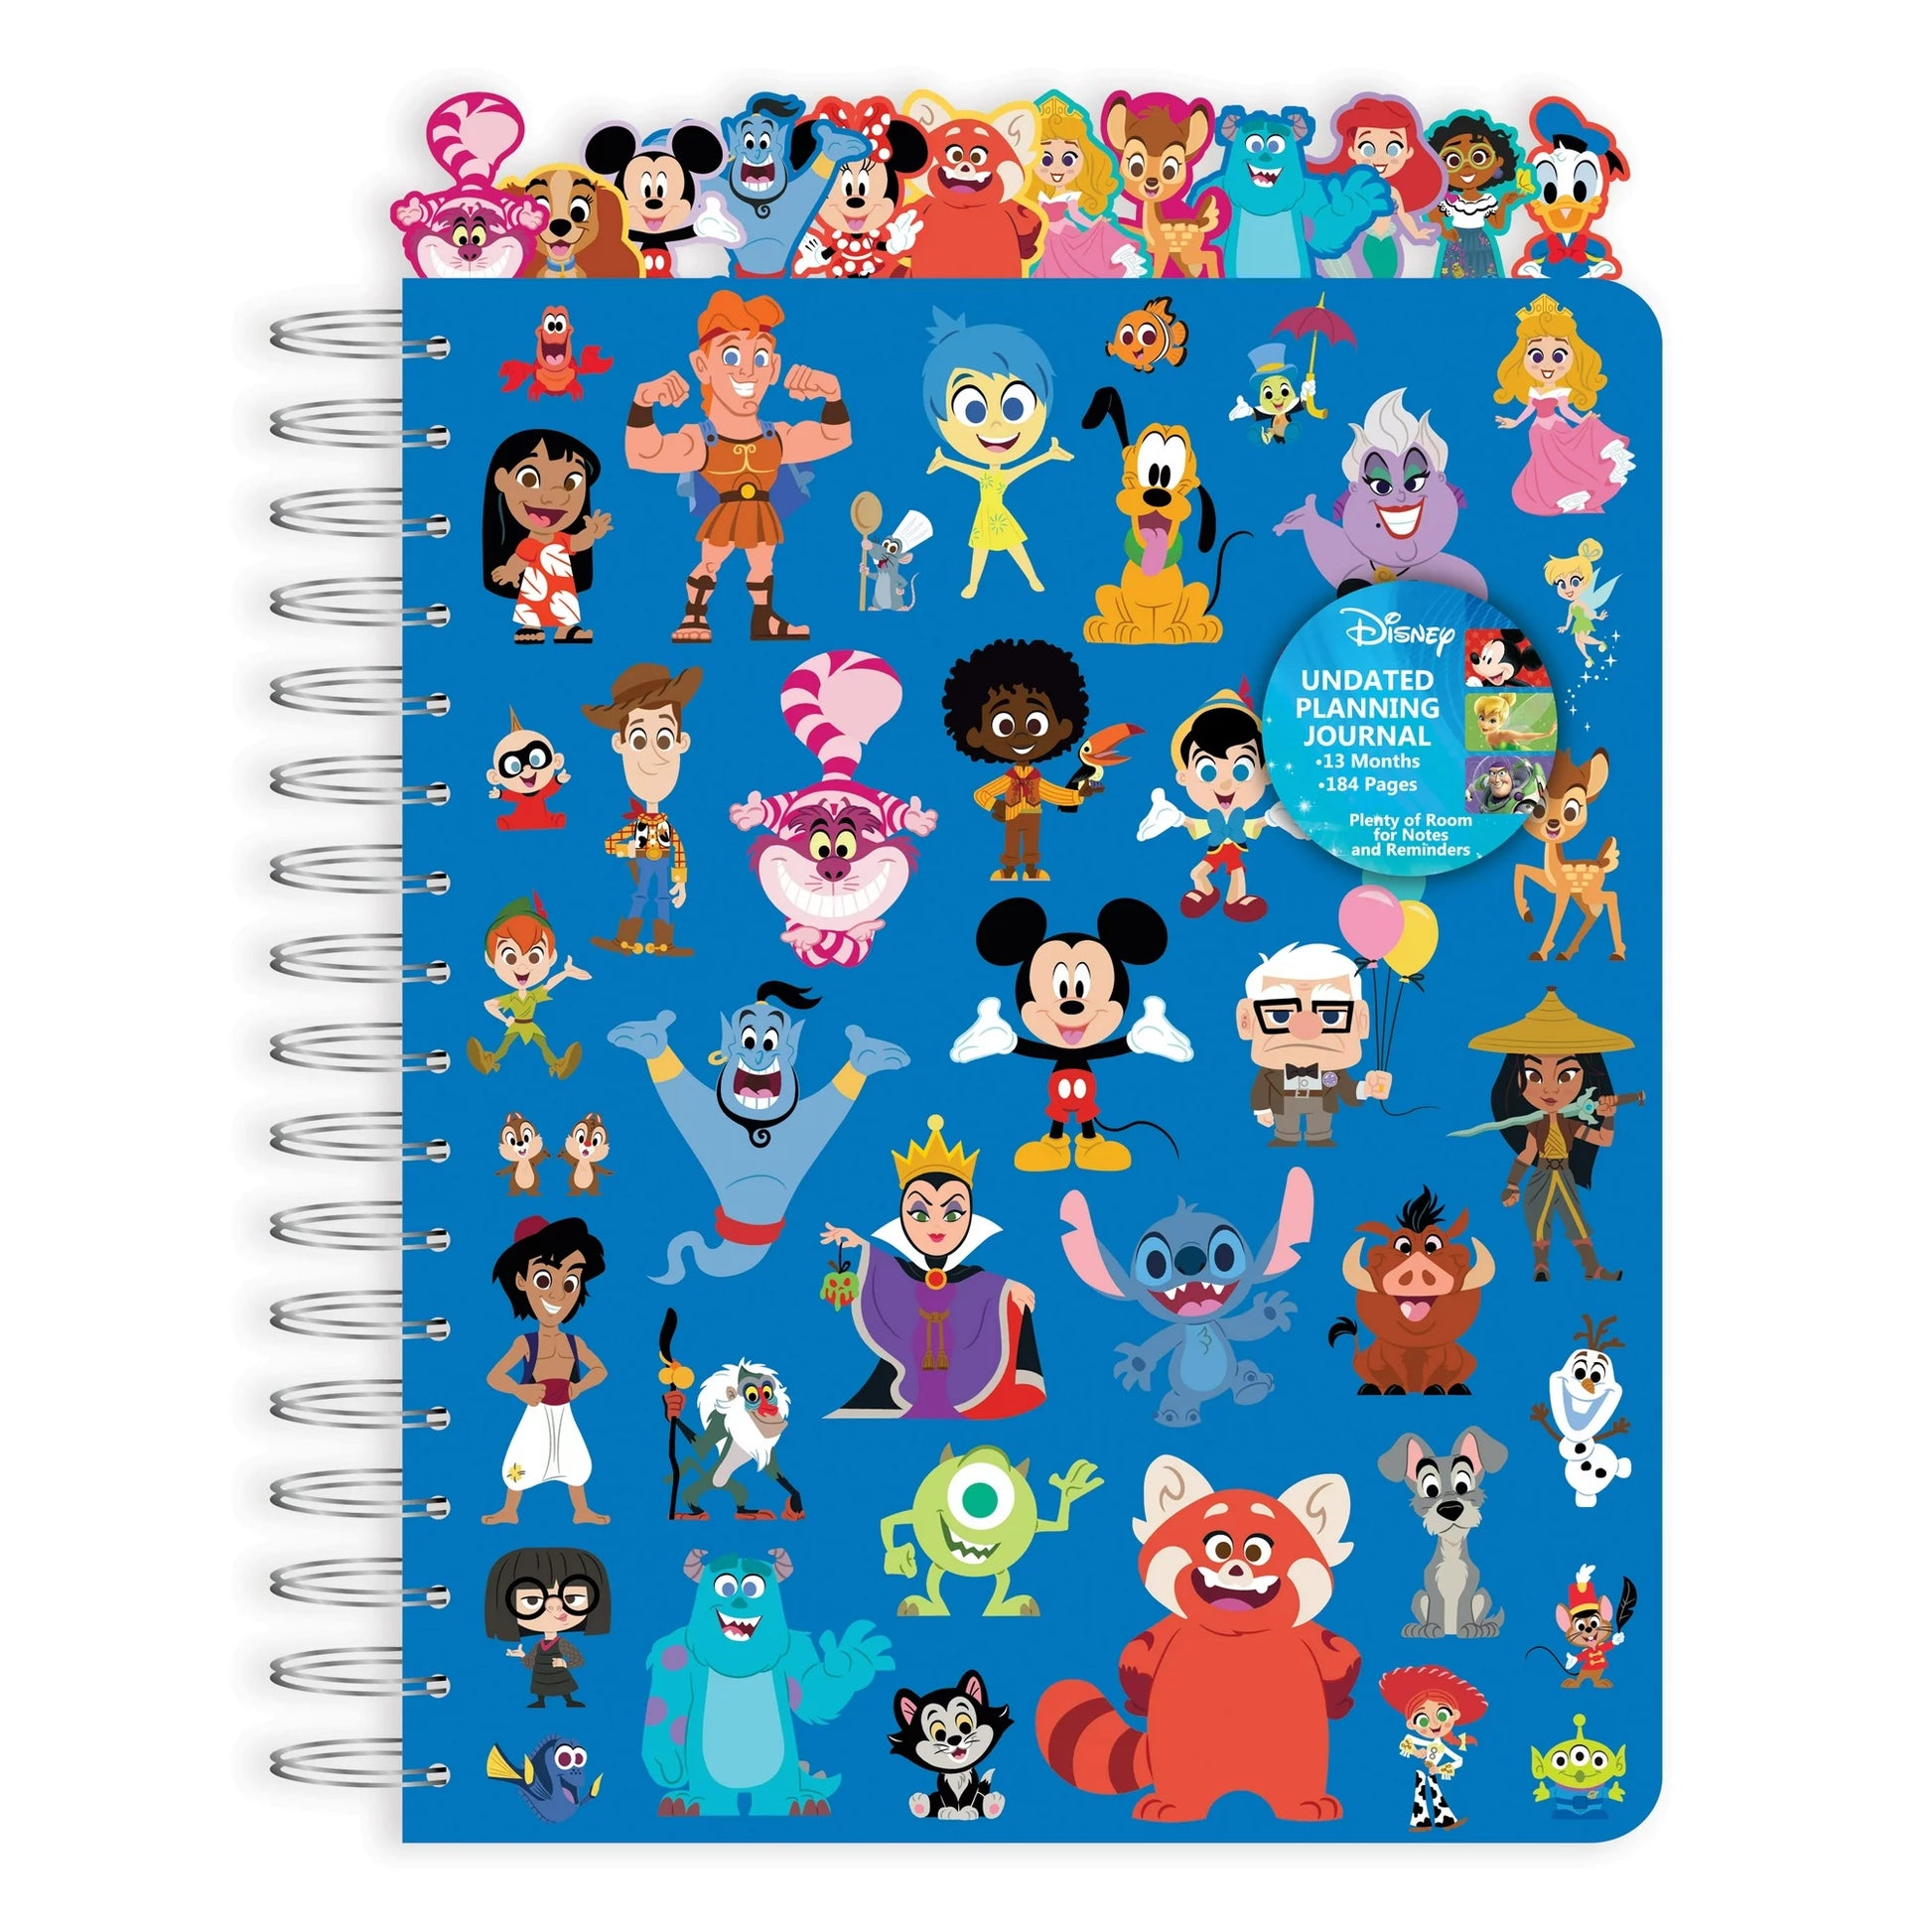 LOC 2024 Simply by Happy Planner 12-Month Planner, Classic- 7 x